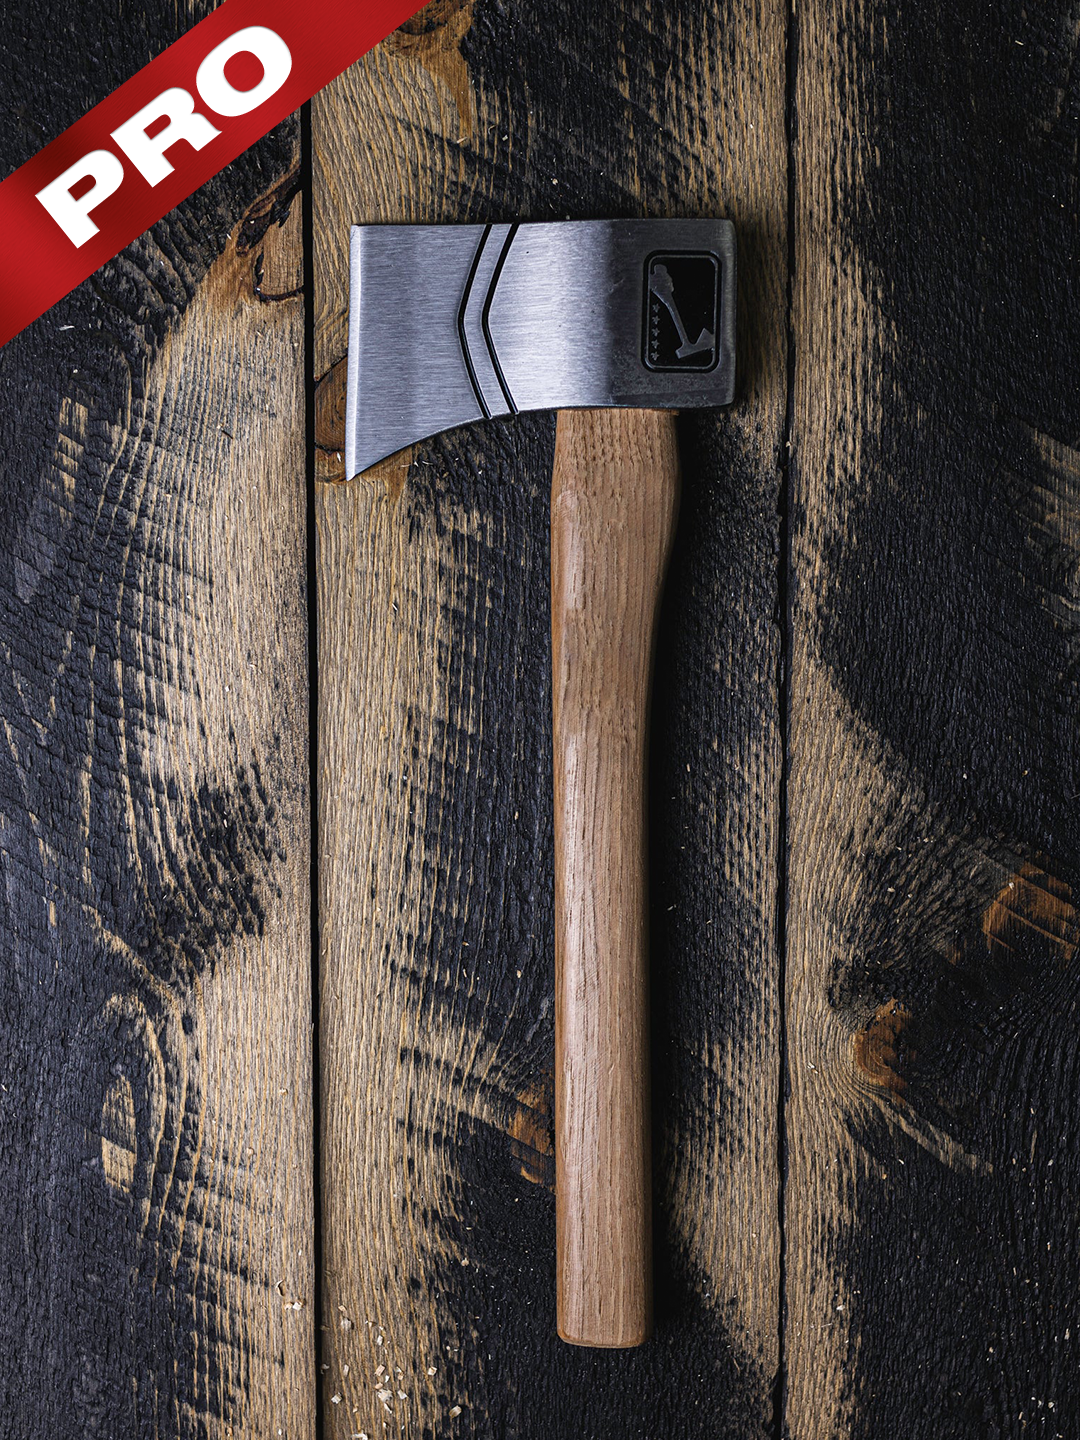 The Corporal Competition Throwing axe by World Axe Throwing League (WATL)